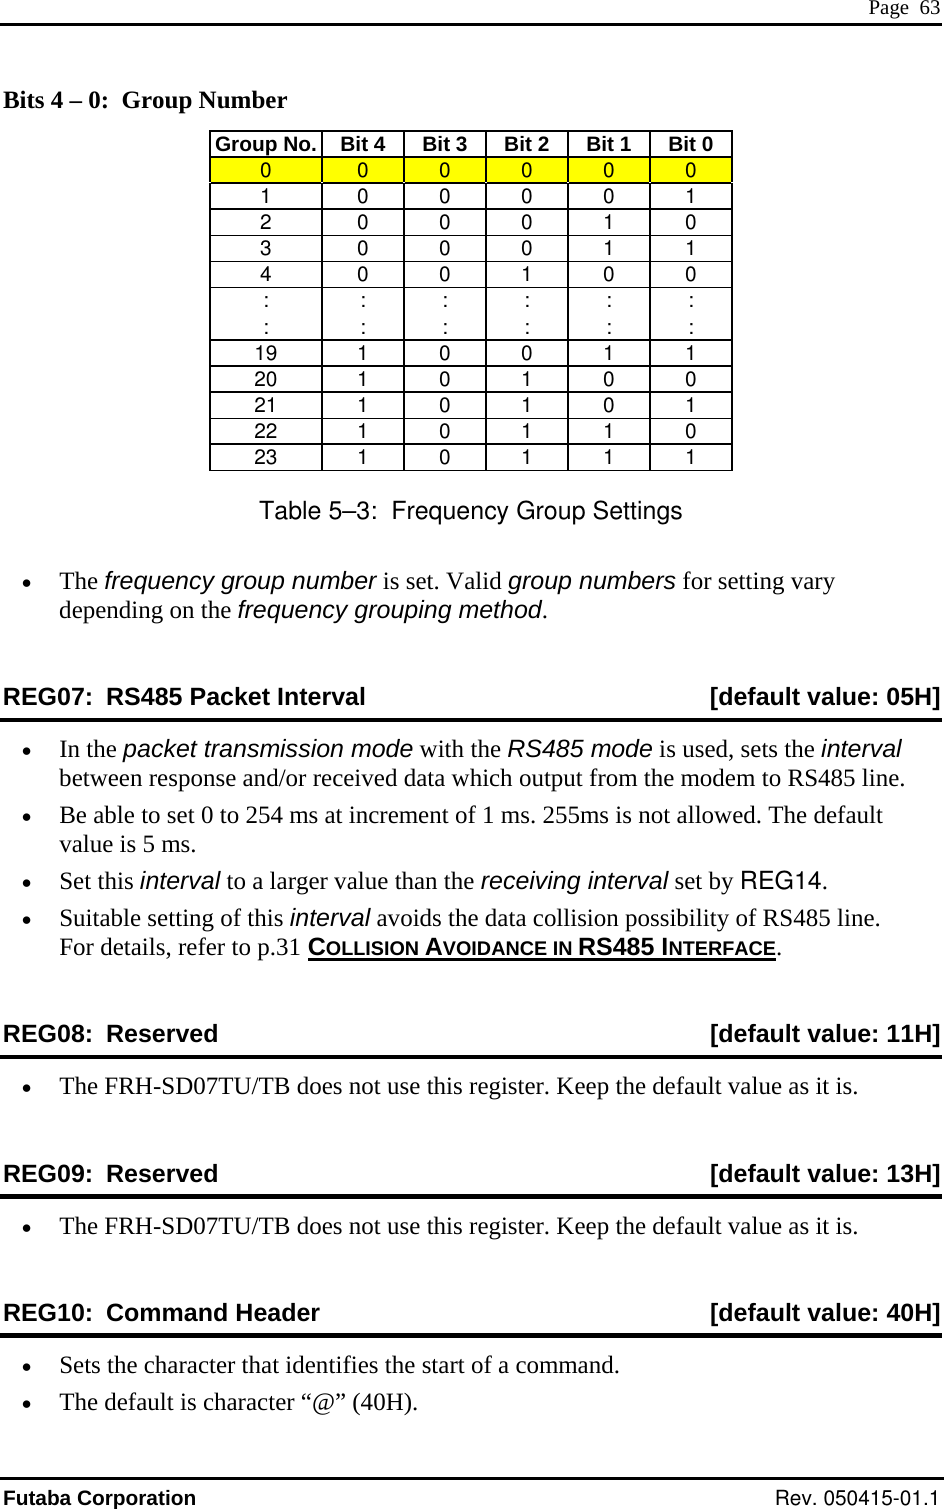  Page  63 B  4its  – 0:  Group Number Group No. Bit 4 Bit 3 Bit 2 Bit 1 Bit 0 0  0  0  0  0  0 1  0 0 0 0 1 2  0 0 0 1 0 3  0 0 0 1 1 4  0 0 1 0 0 :  : : : : : :  : : : : : 19  1 0 0 1 1 20  1 0 1 0 0 21  1 0 1 0 1 22  1 0 1 1 0 23  1 0 1 1 1 Table 5–3:  Frequency Group Settings ber is set. Valid group numbers fo[default value: 05H] •  The frequency group num r setting vary depending on the frequency grouping method. REG07:  RS485 Packet Interval •  In the  nsmission m h the RS485 e is  set  between re nse and/or  h output from the m em to RS485 line.  •  Be able to set 0 to 254 ms ms. 255m s not a ed. T default value is 5 •  Set this interval to a large ceiving in rval set by REG14.   •  Suitable setting of this inte ata collision possibility of RS485 line.  For details, refer to p.31 CNCE IN RS485 INTERFACEpacket tra ode wit  mod  used, s the intervalspo received data whic od at increment of 1  s i llow he ms. r value than the re terval avoids the dOLLISION AVOIDA . REG08:  Reserved  [default value: 11H] •  The FRH-SD07TU/TB does not use this register. Keep the default value as it is. R ult value: 13H] EG09:  Reserved  [defa•  The FRH-SD07TU/TB does not use this register. Keep the default value as it is. REG10:  Command Header  [default value: 40H] •  Sets the character that identifies the start of a command. •  The default is character “@” (40H). Futaba Corporation Rev. 050415-01.1 